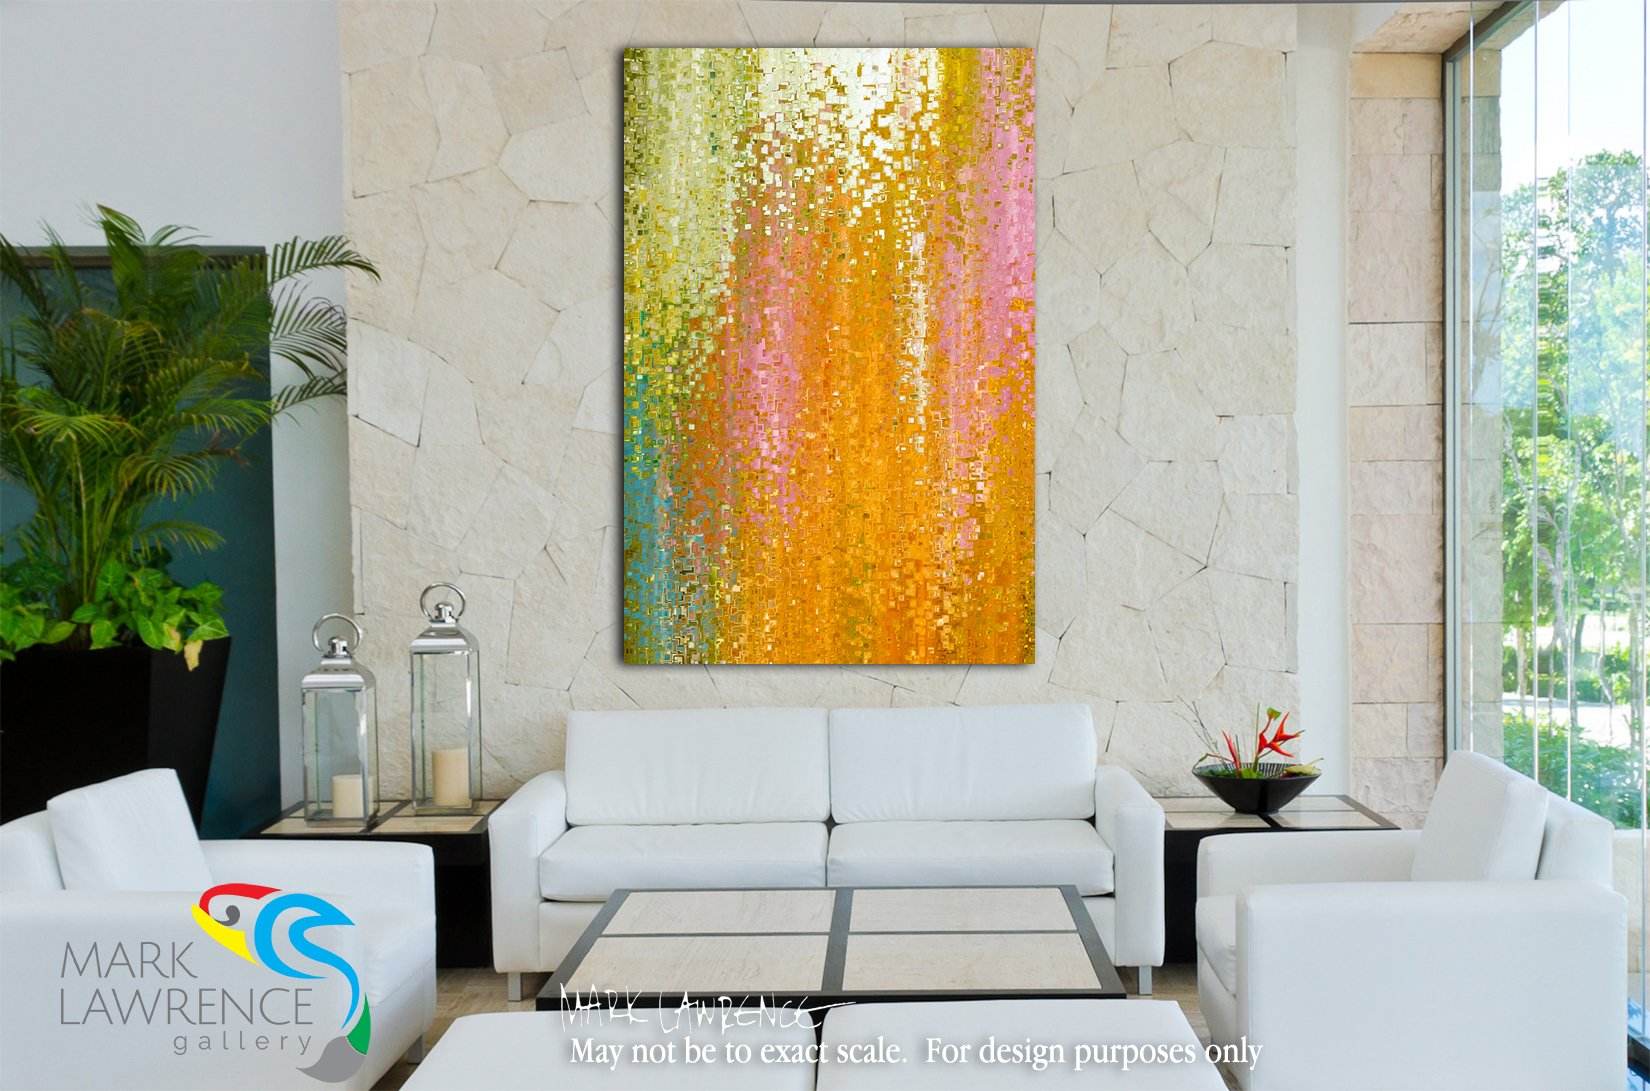 2 Corinthians 9:15. His Indescribable Gift. Christian themed limited edition art. Ultra-hand textured and embellished with brush strokes by the artist. Signed and numbered inspirational abstract art. Share your faith with art! Thanks be to God for His indescribable gift!